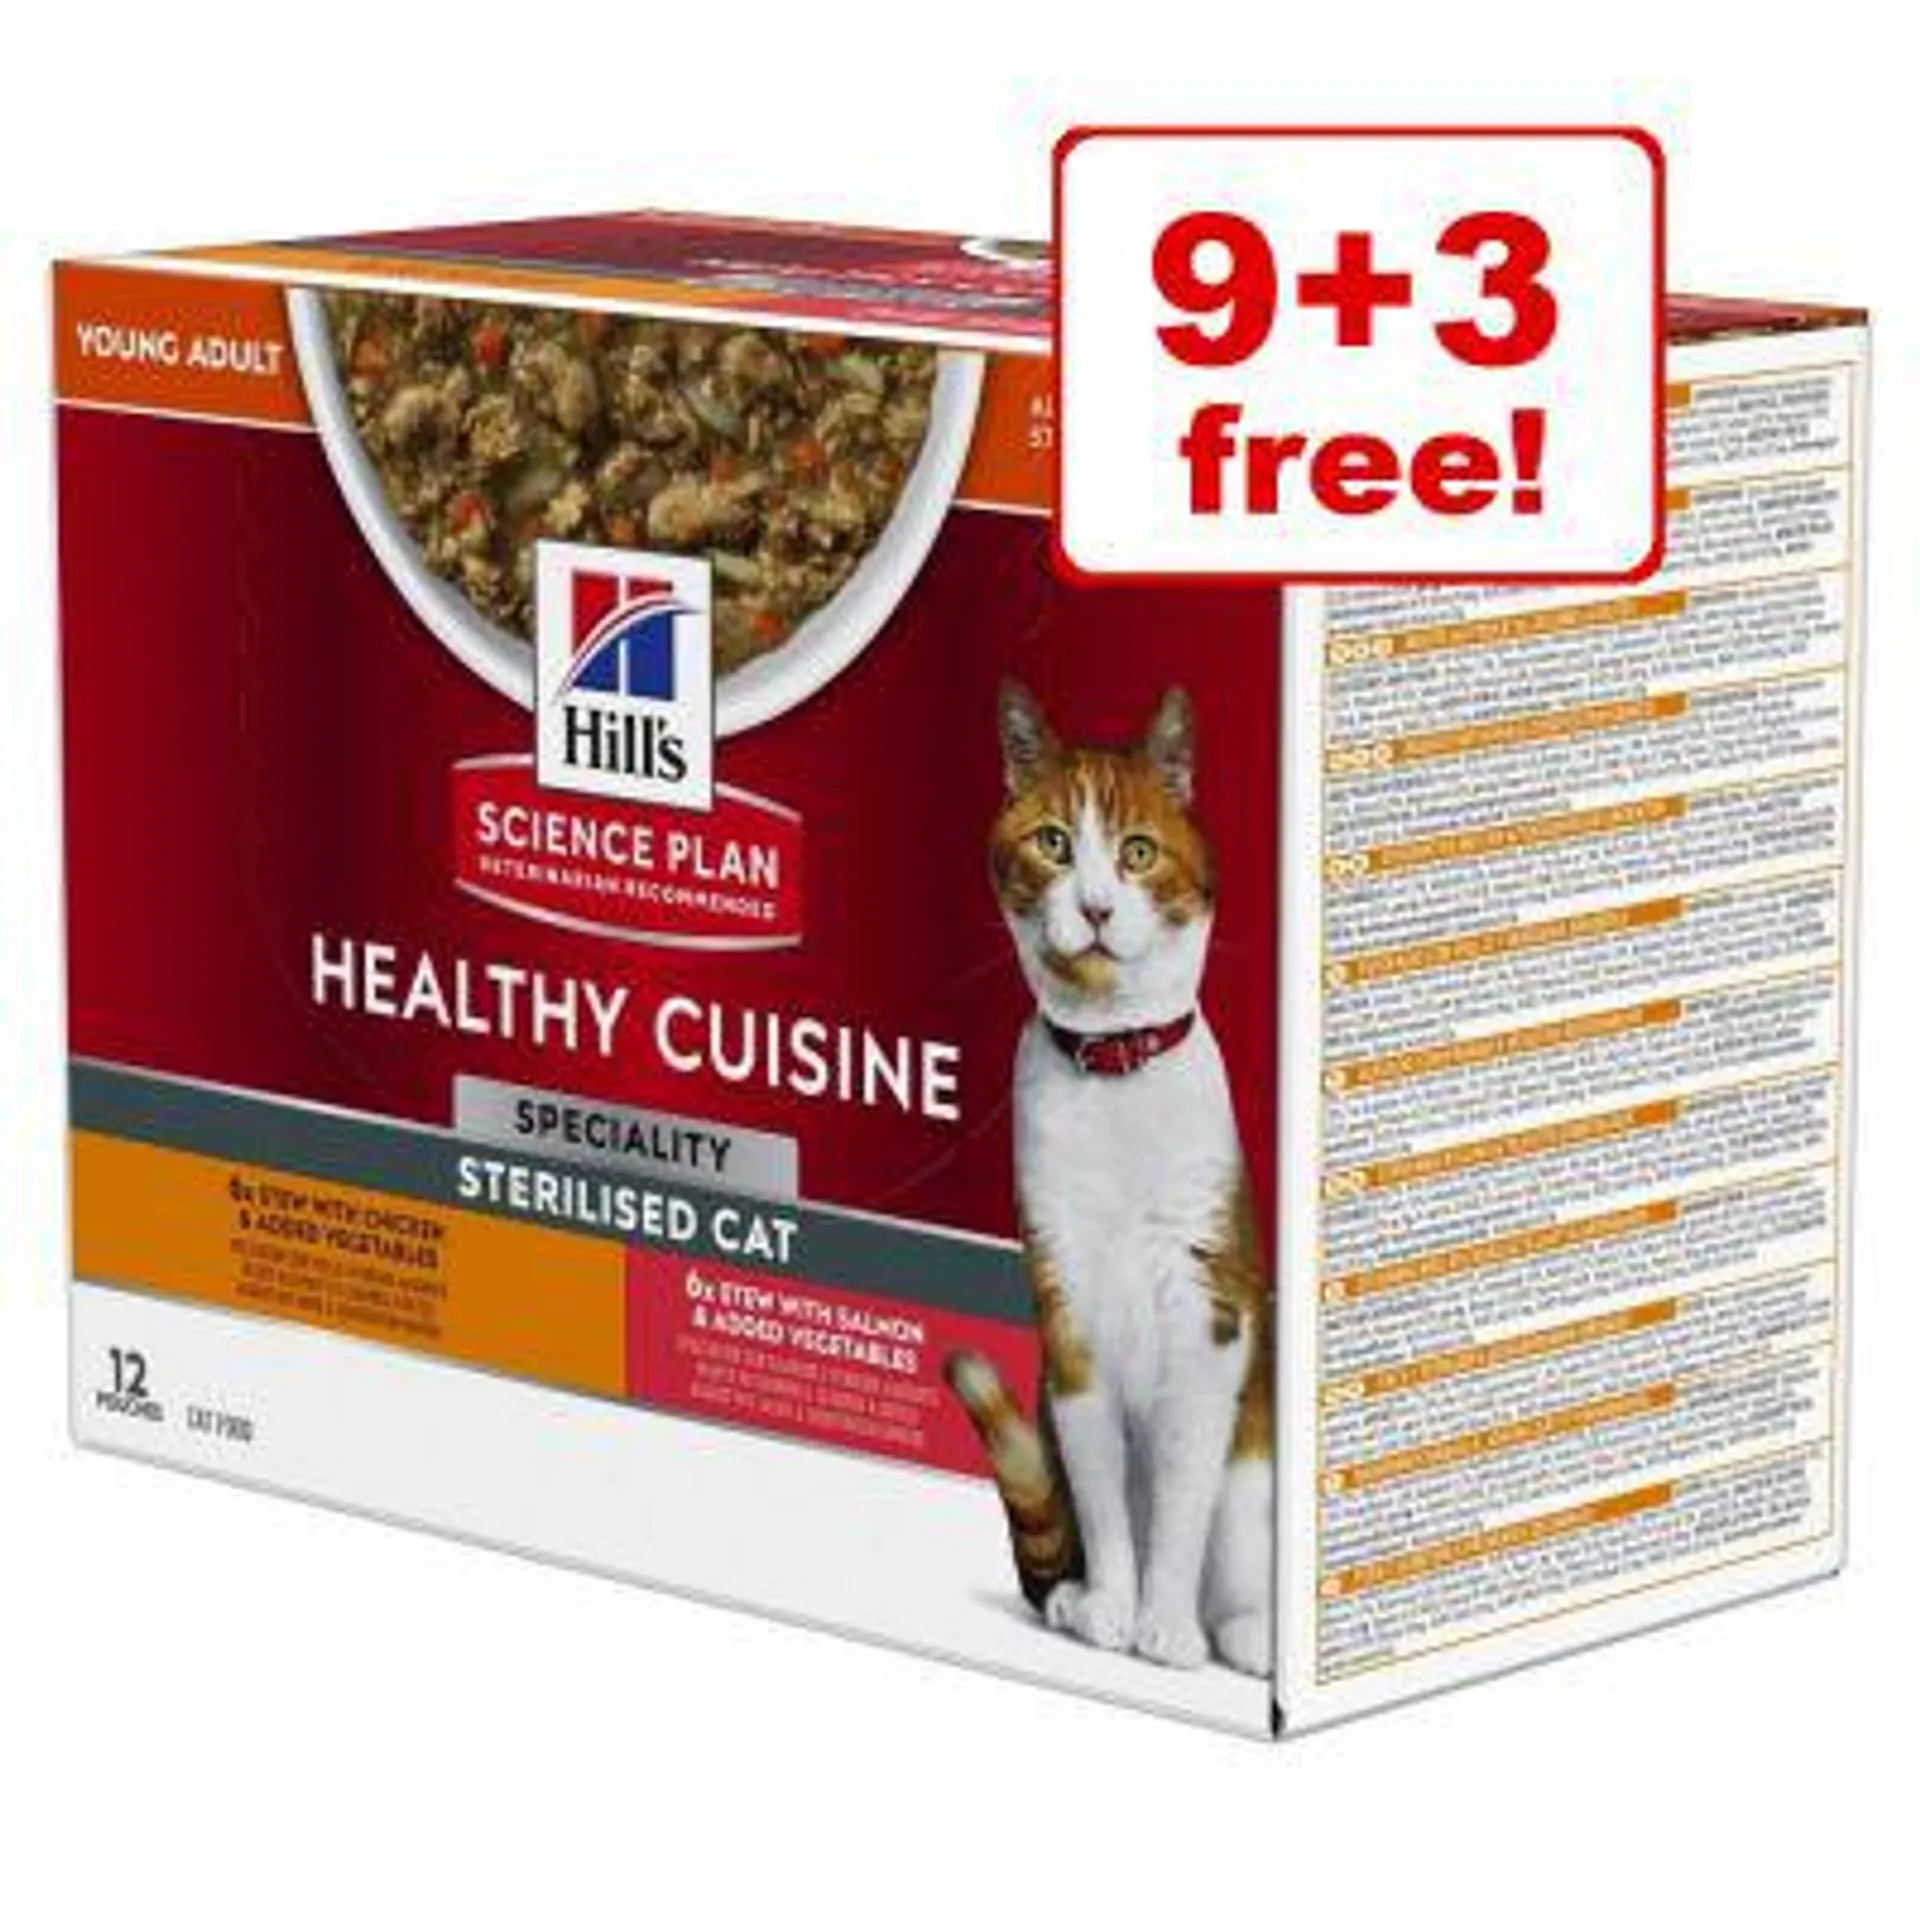 12 x 80g Hill's Science Plan Adult Sterilised Healthy Cuisine - 9 + 3 Free!*